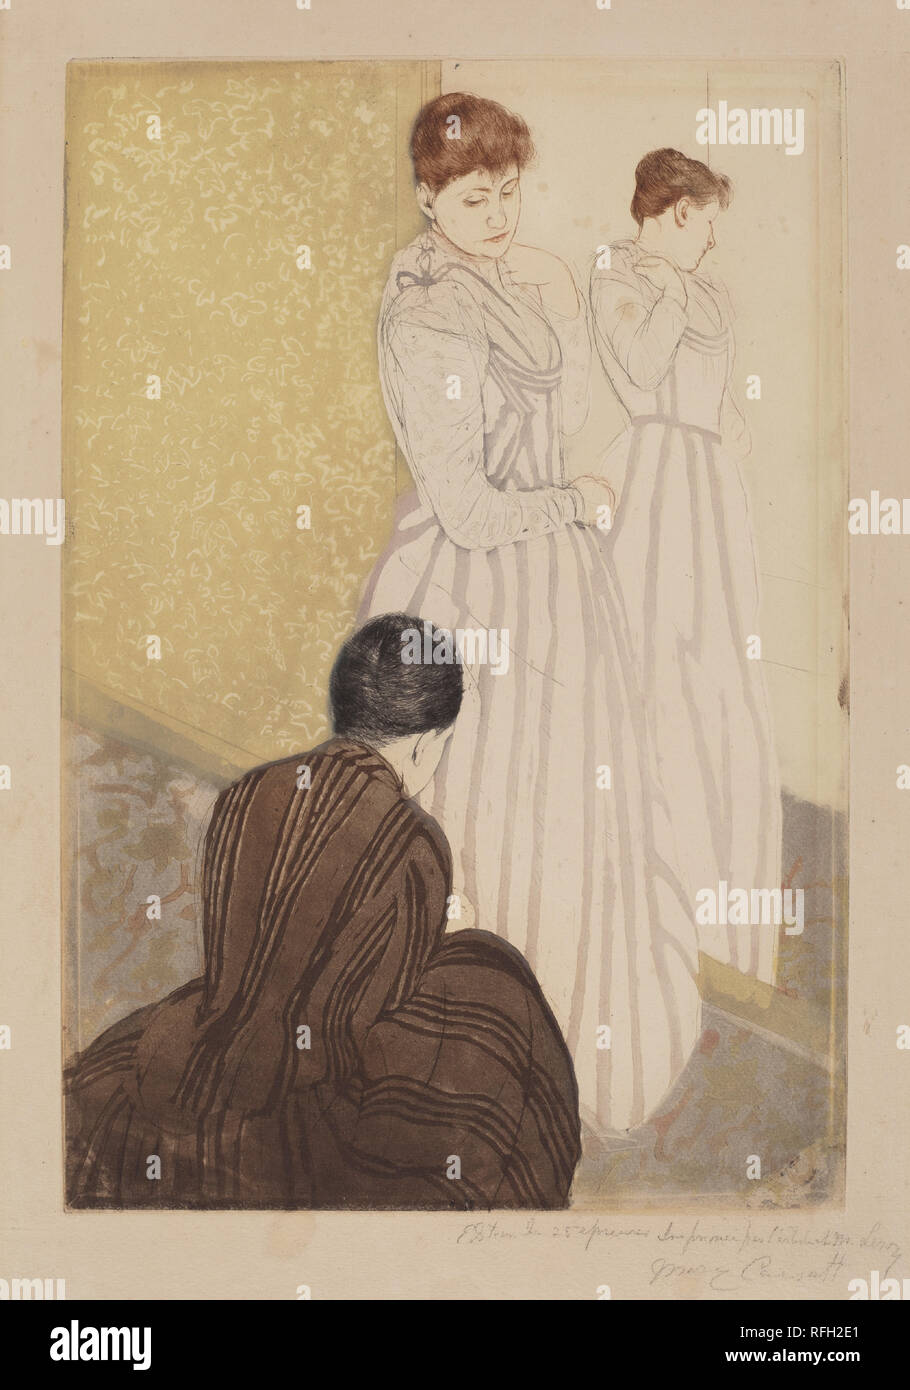 The Fitting. Dated: 1890-1891. Dimensions: plate: 37.5 x 25.4 cm (14 3/4 x 10 in.)  sheet: 47.8 x 30.8 cm (18 13/16 x 12 1/8 in.). Medium: color drypoint and aquatint on laid paper. Museum: National Gallery of Art, Washington DC. Author: Mary Cassatt. Stock Photo